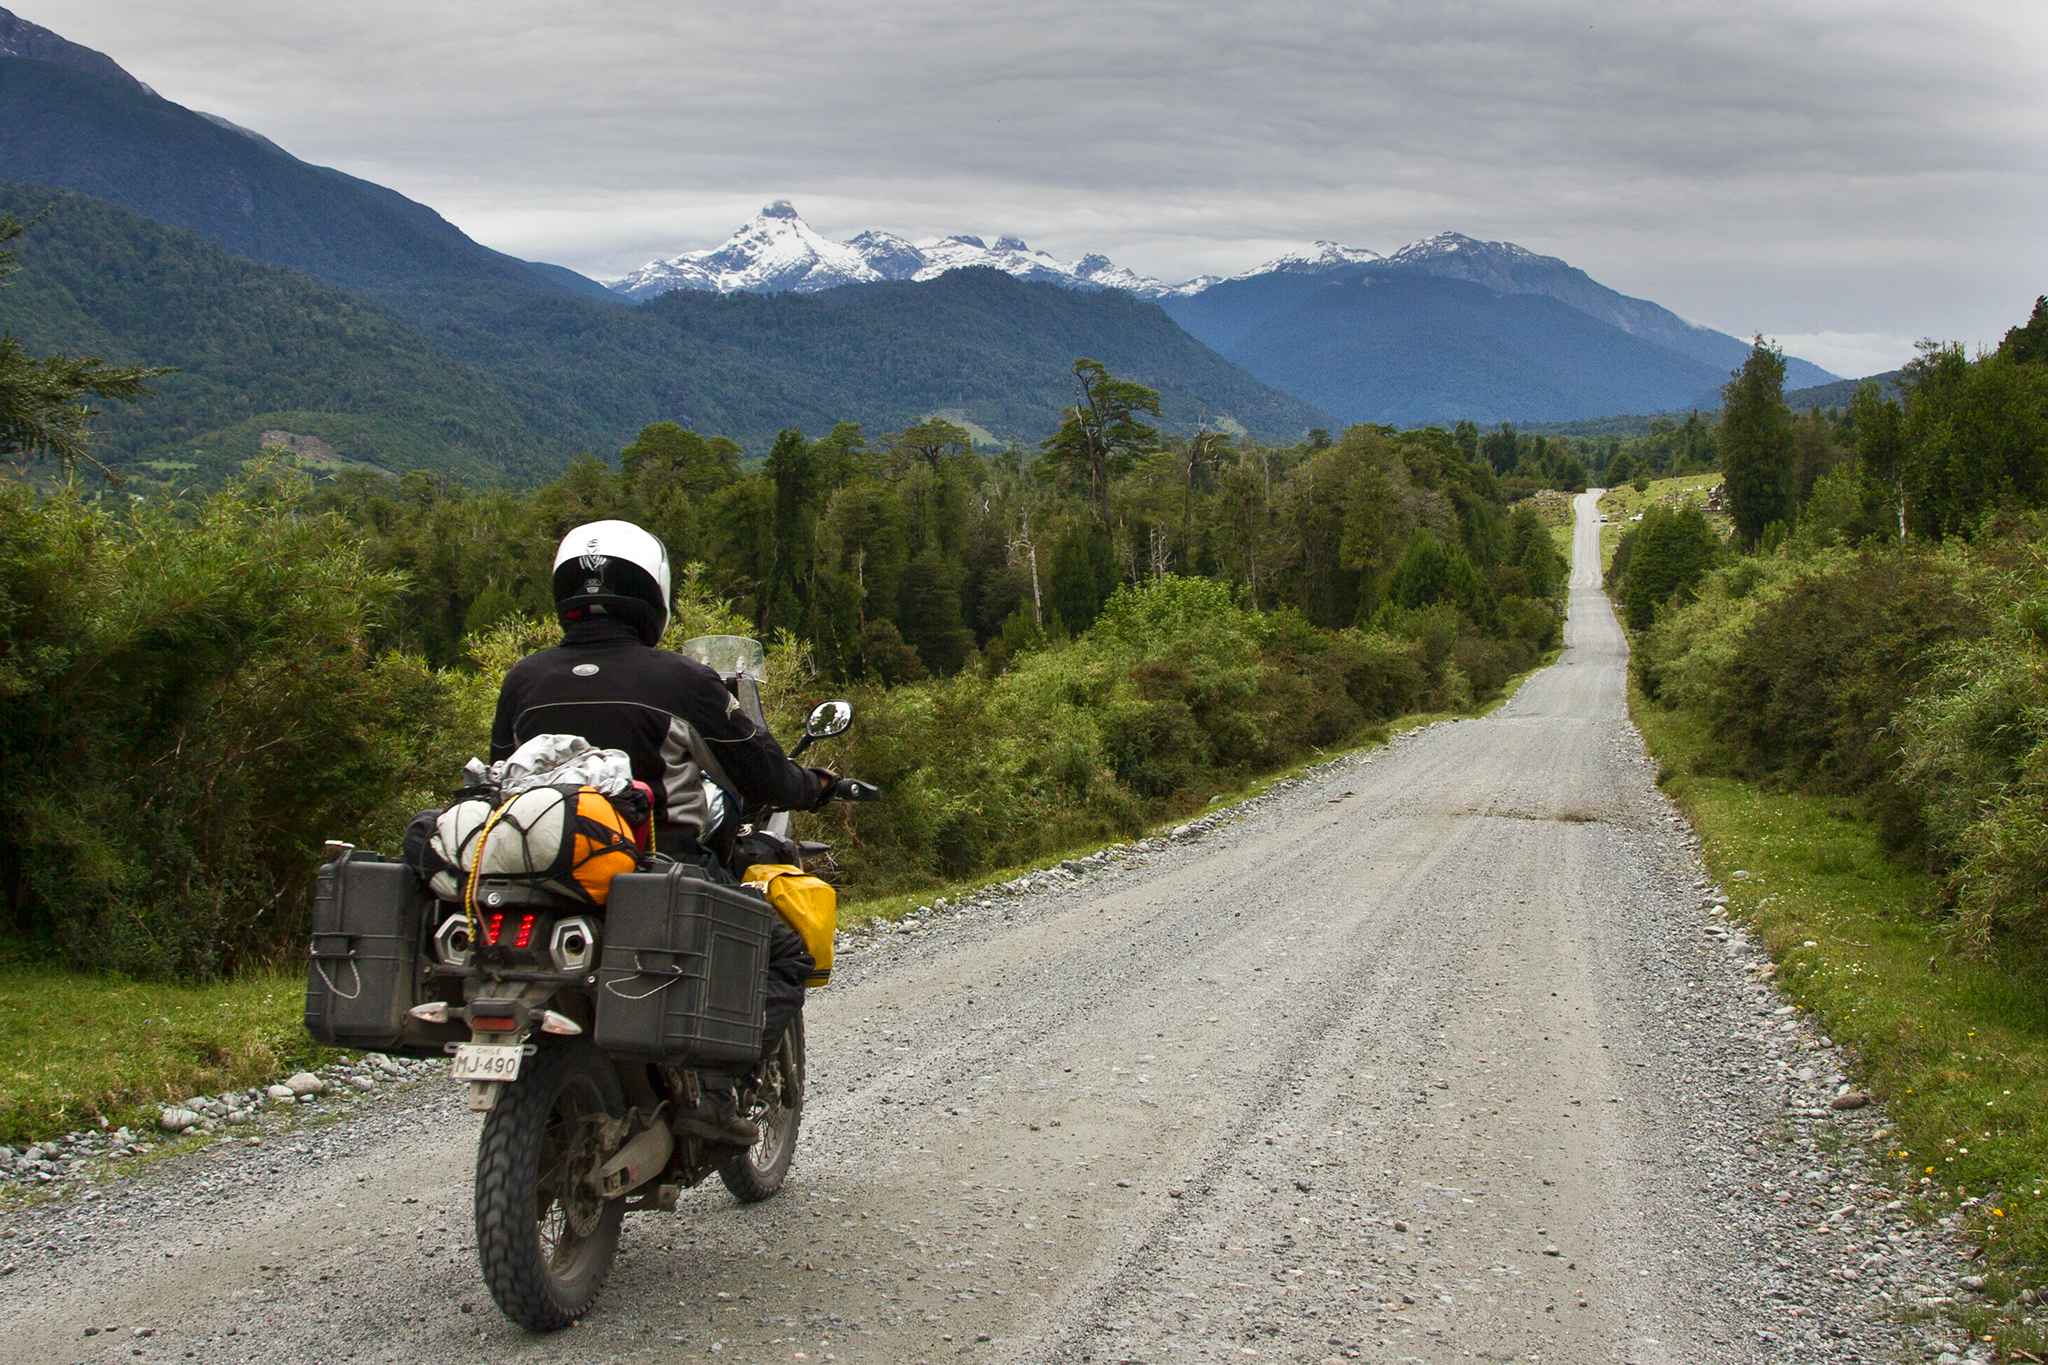  The man-made spine of Chilean Patagonia is the unpaved Ruta 7, better-known as the Carretera Austral. Spanning 770 miles from Puerto Montt to Villa O-Higgins, the unpaved highway meanders through dense Valdivian temperate rain forests, glacial fjord